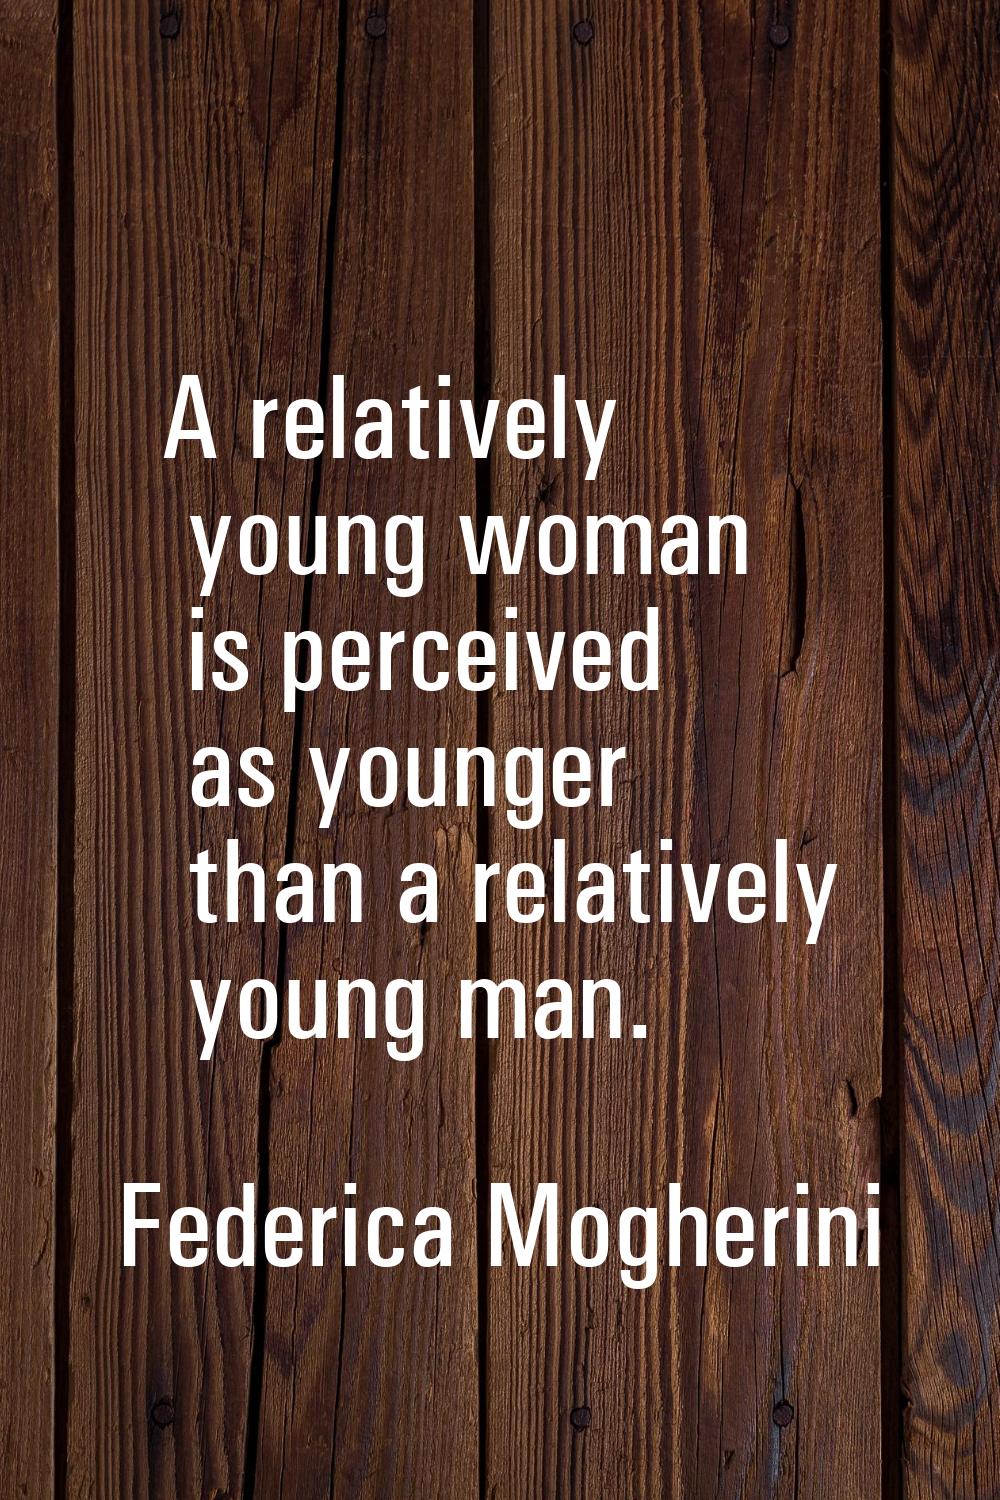 A relatively young woman is perceived as younger than a relatively young man.